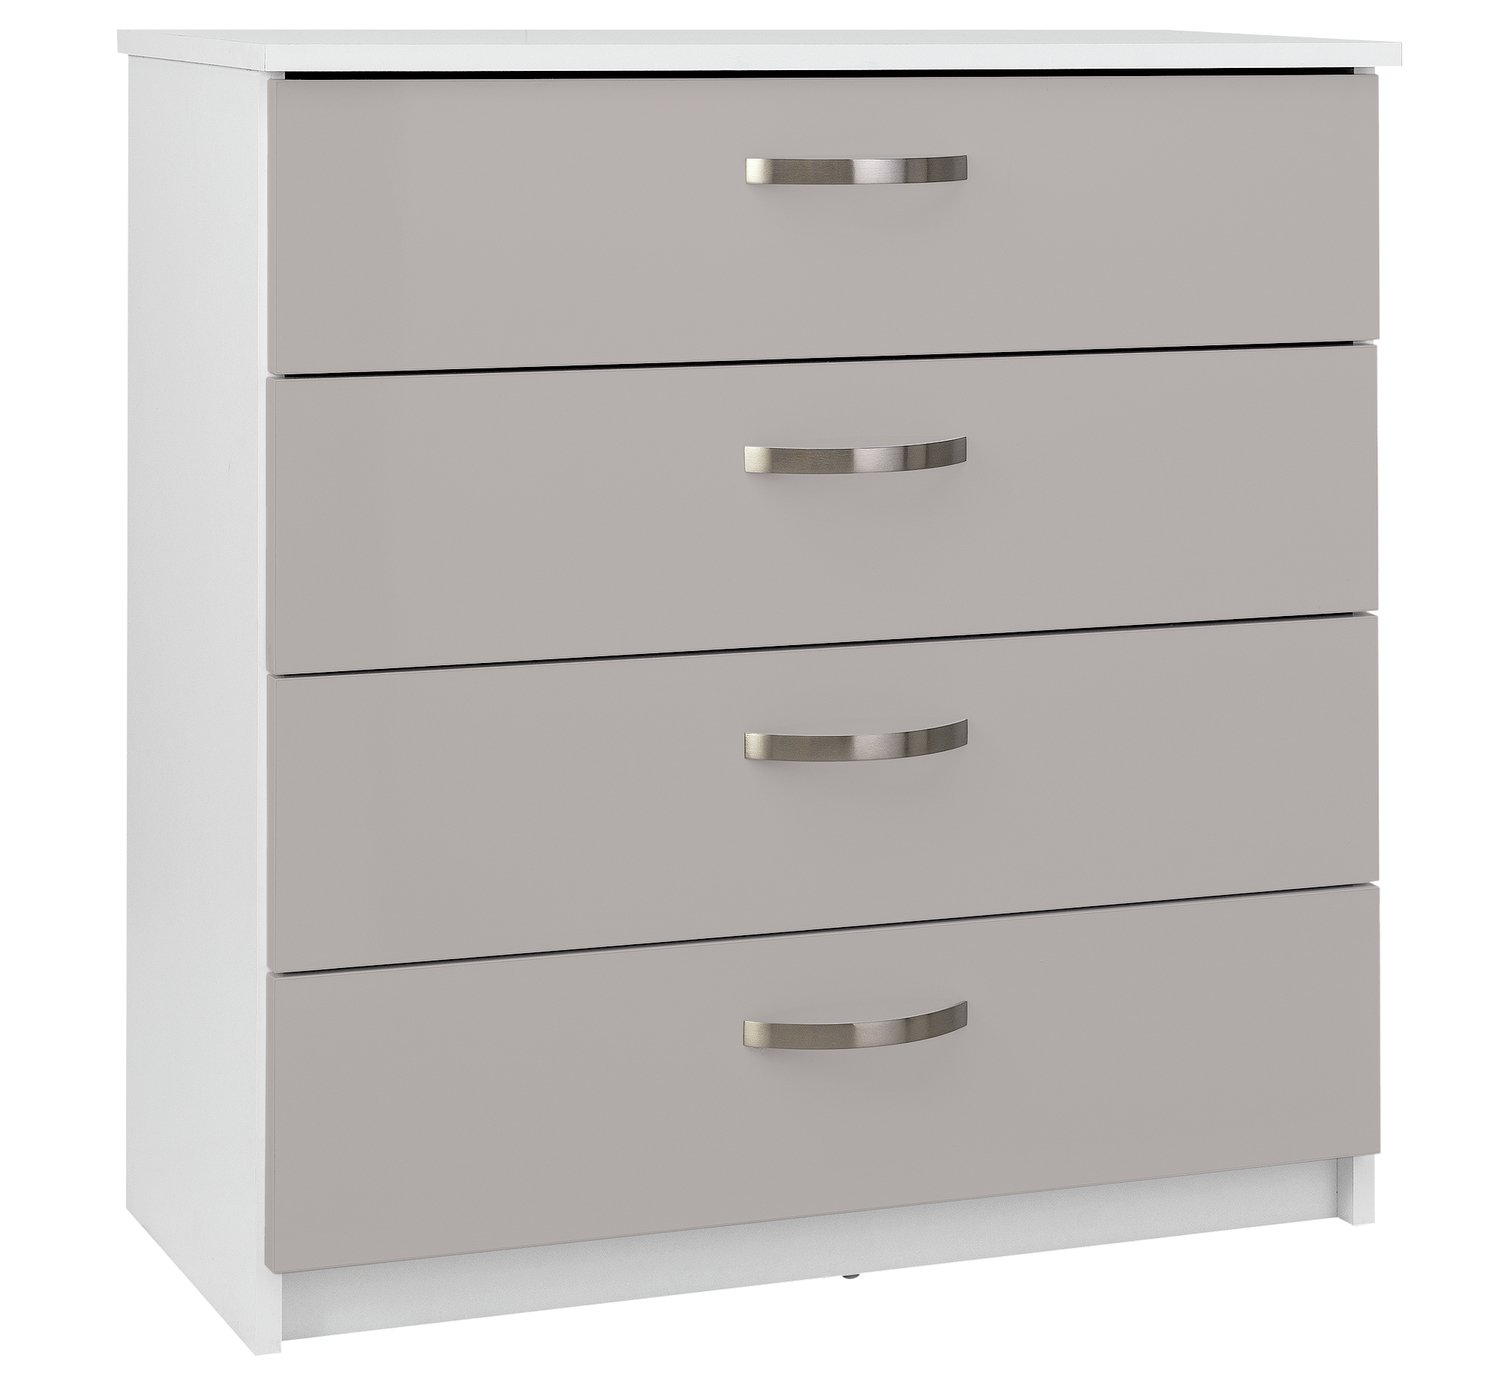 Argos Home Cheval Gloss 4 Drawer Chest of Drawers - Grey